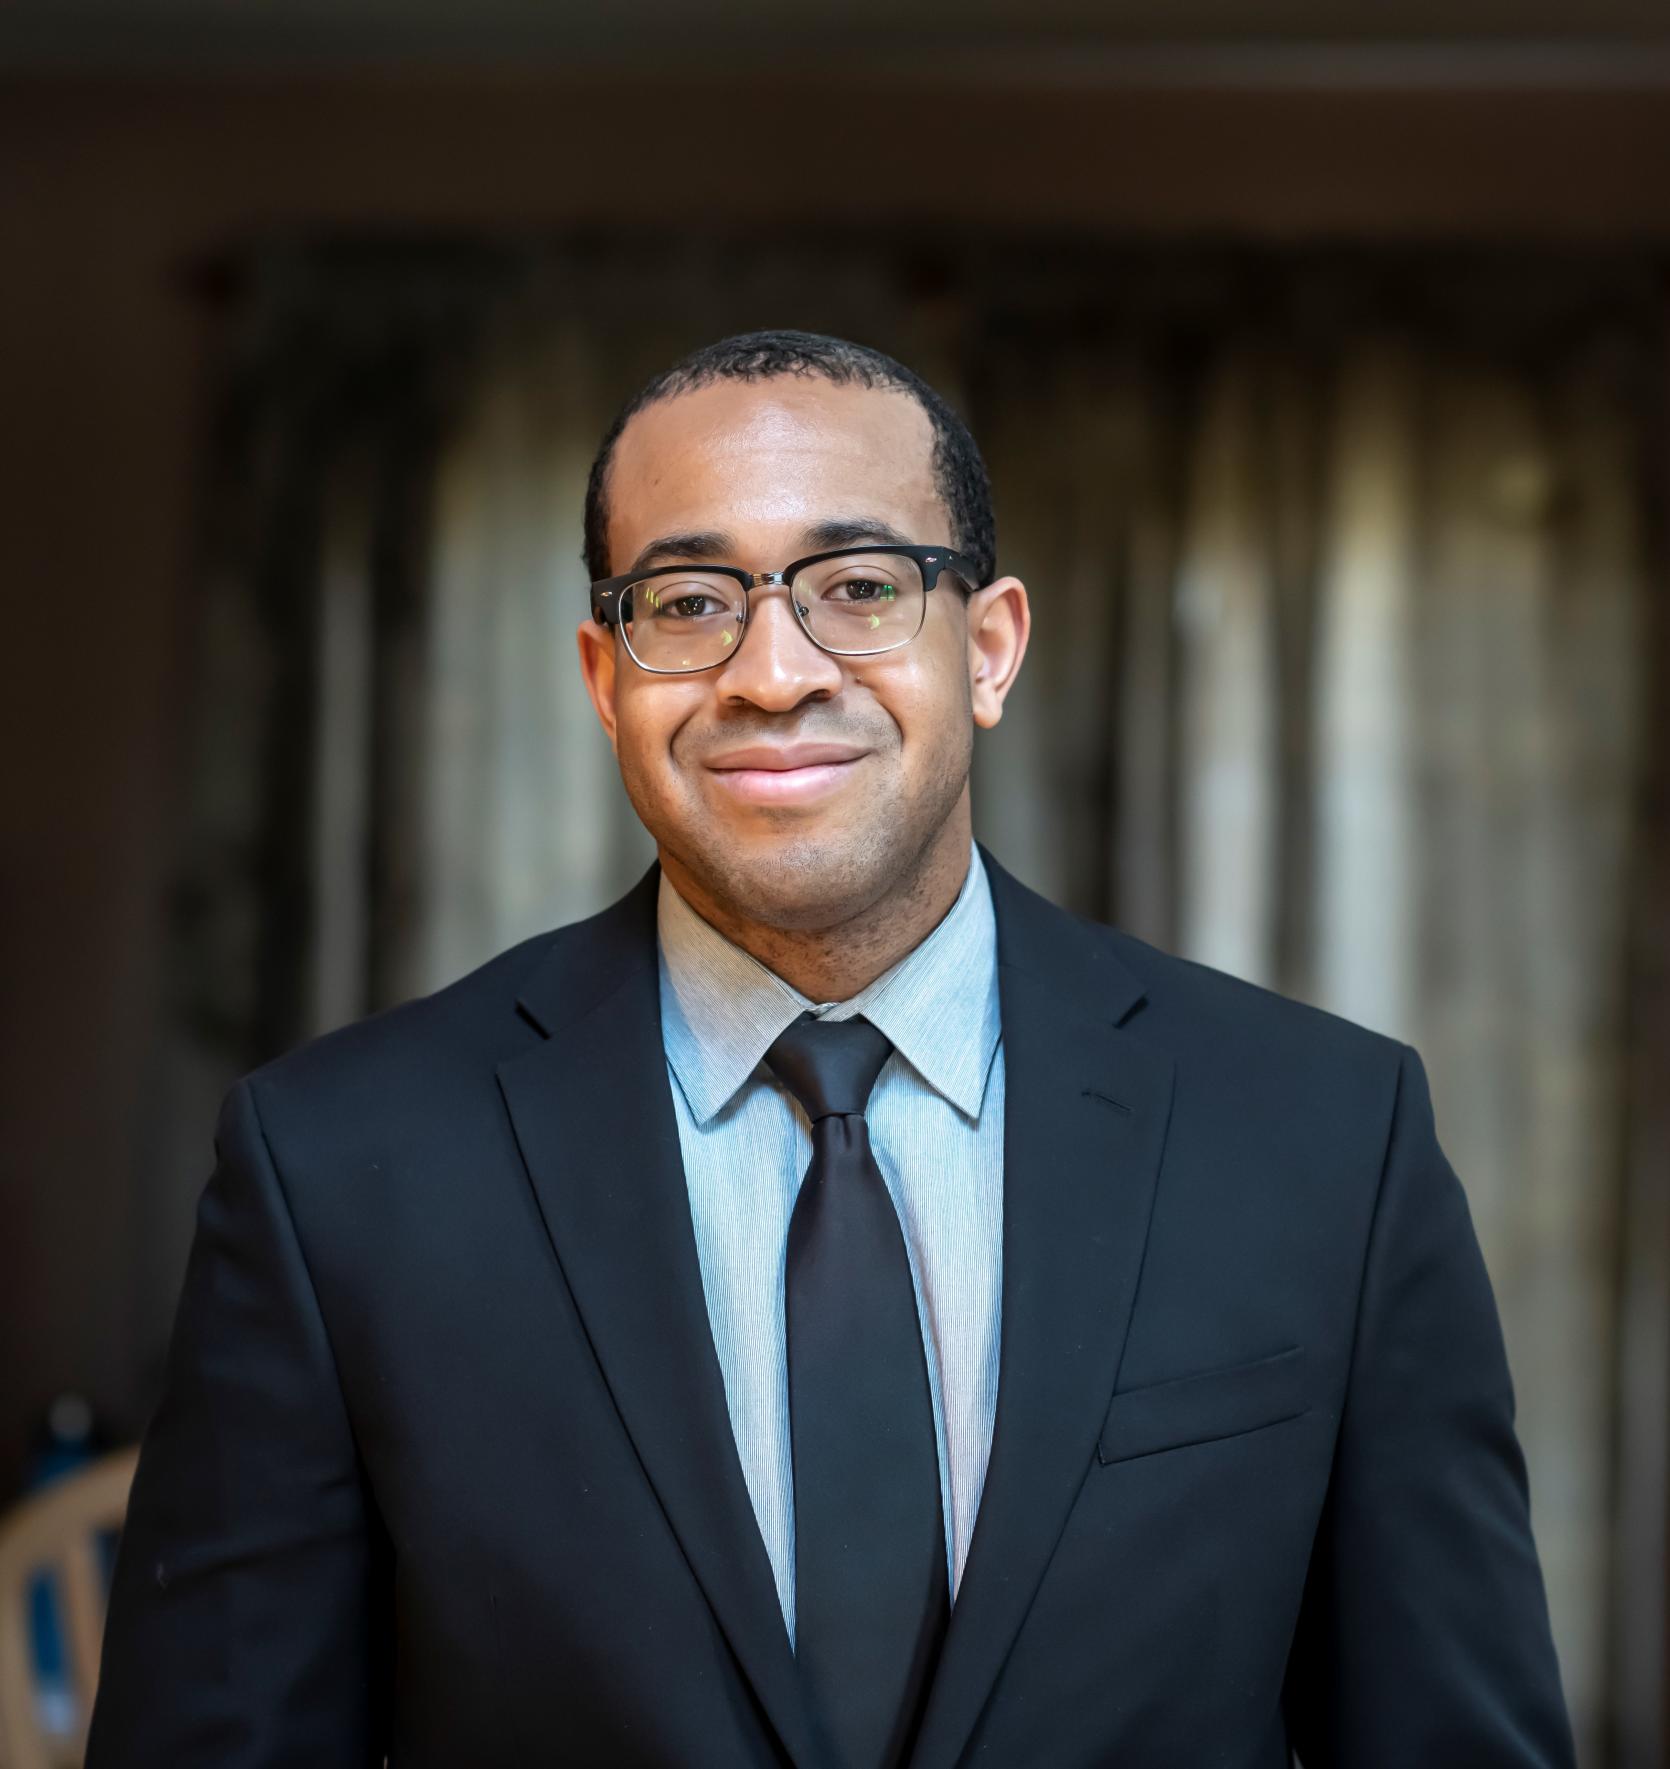 Black man with glasses and dark suit